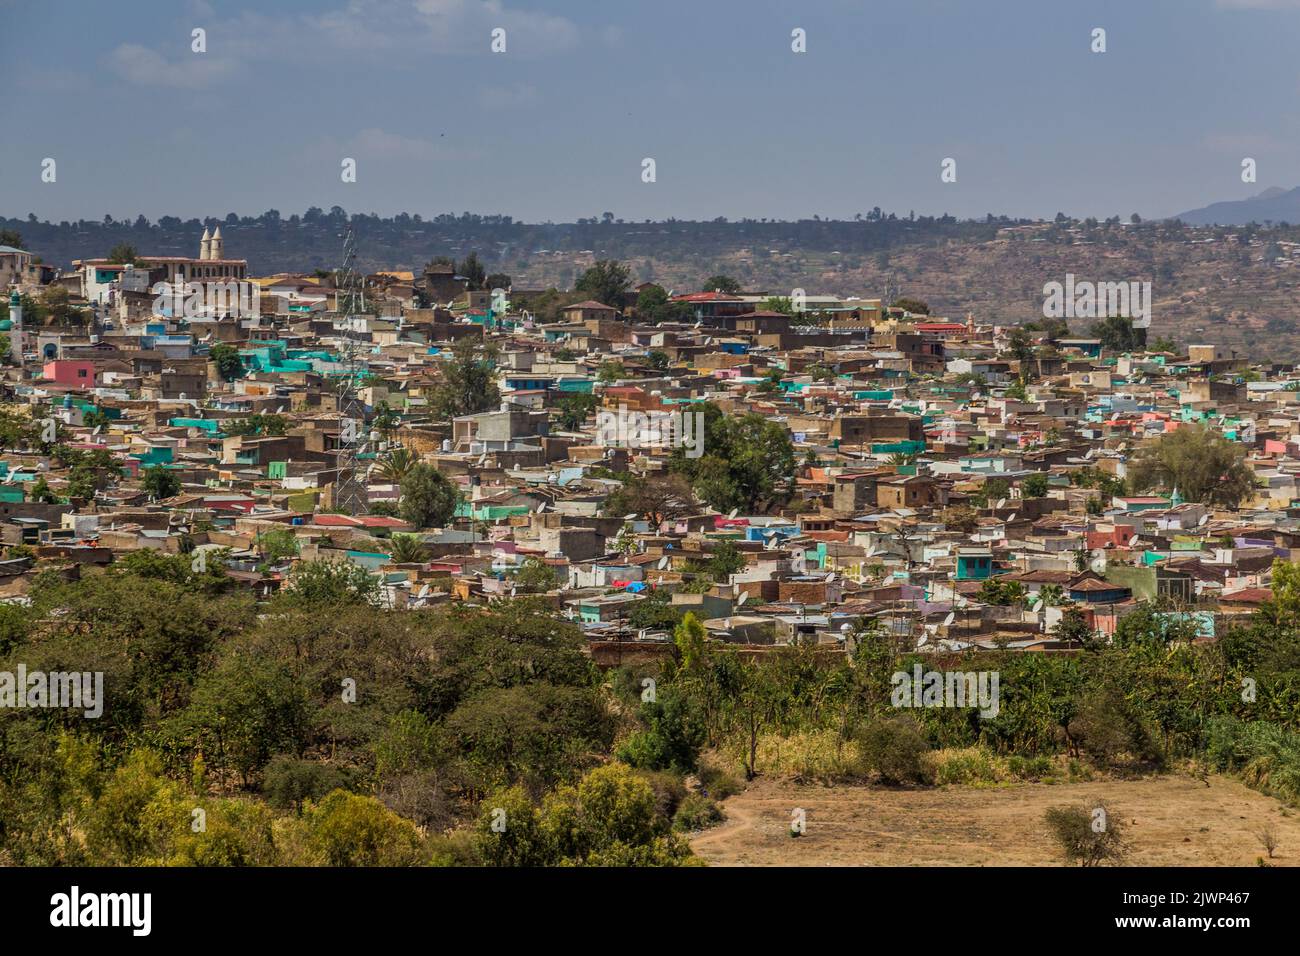 Aerial view of Harar old town, Ethiopia Stock Photo